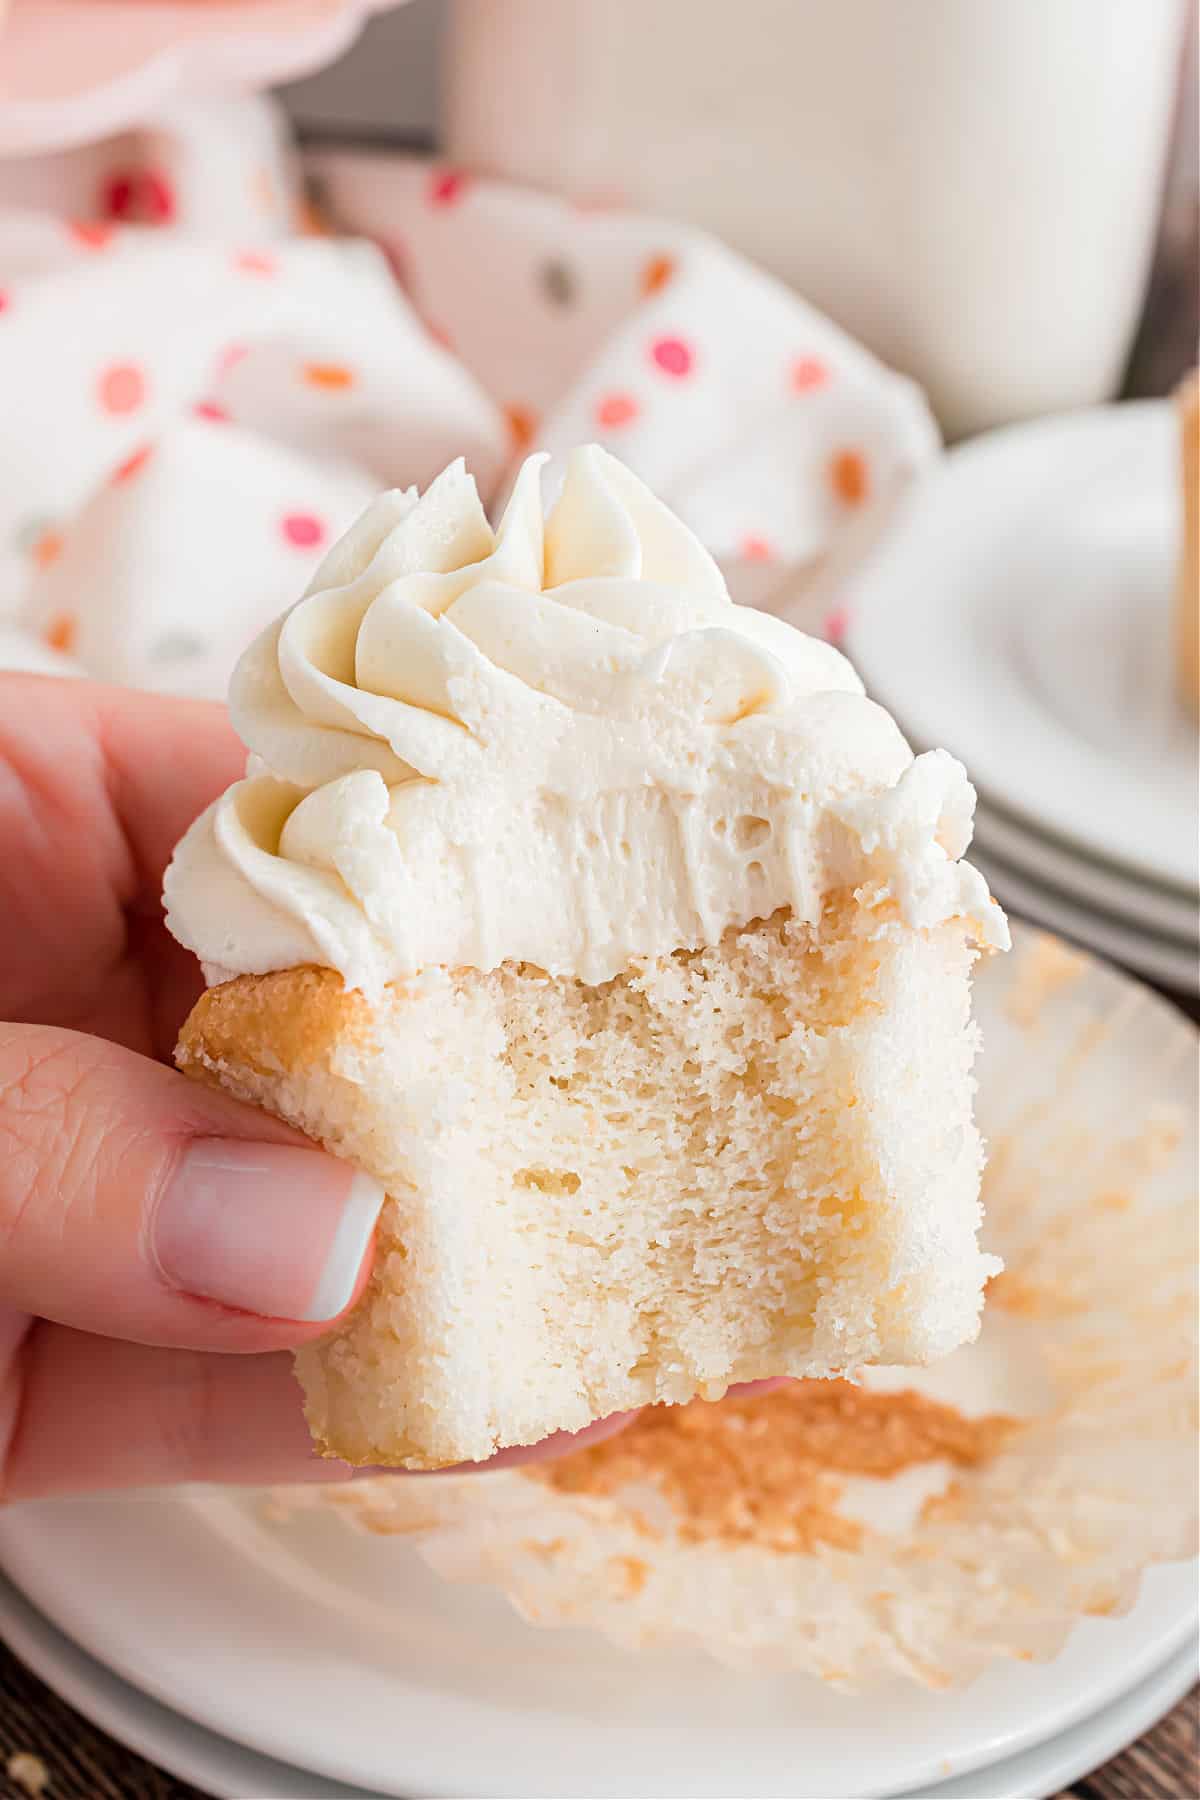 A bite taken out of a white cupcake with vanilla frosting.